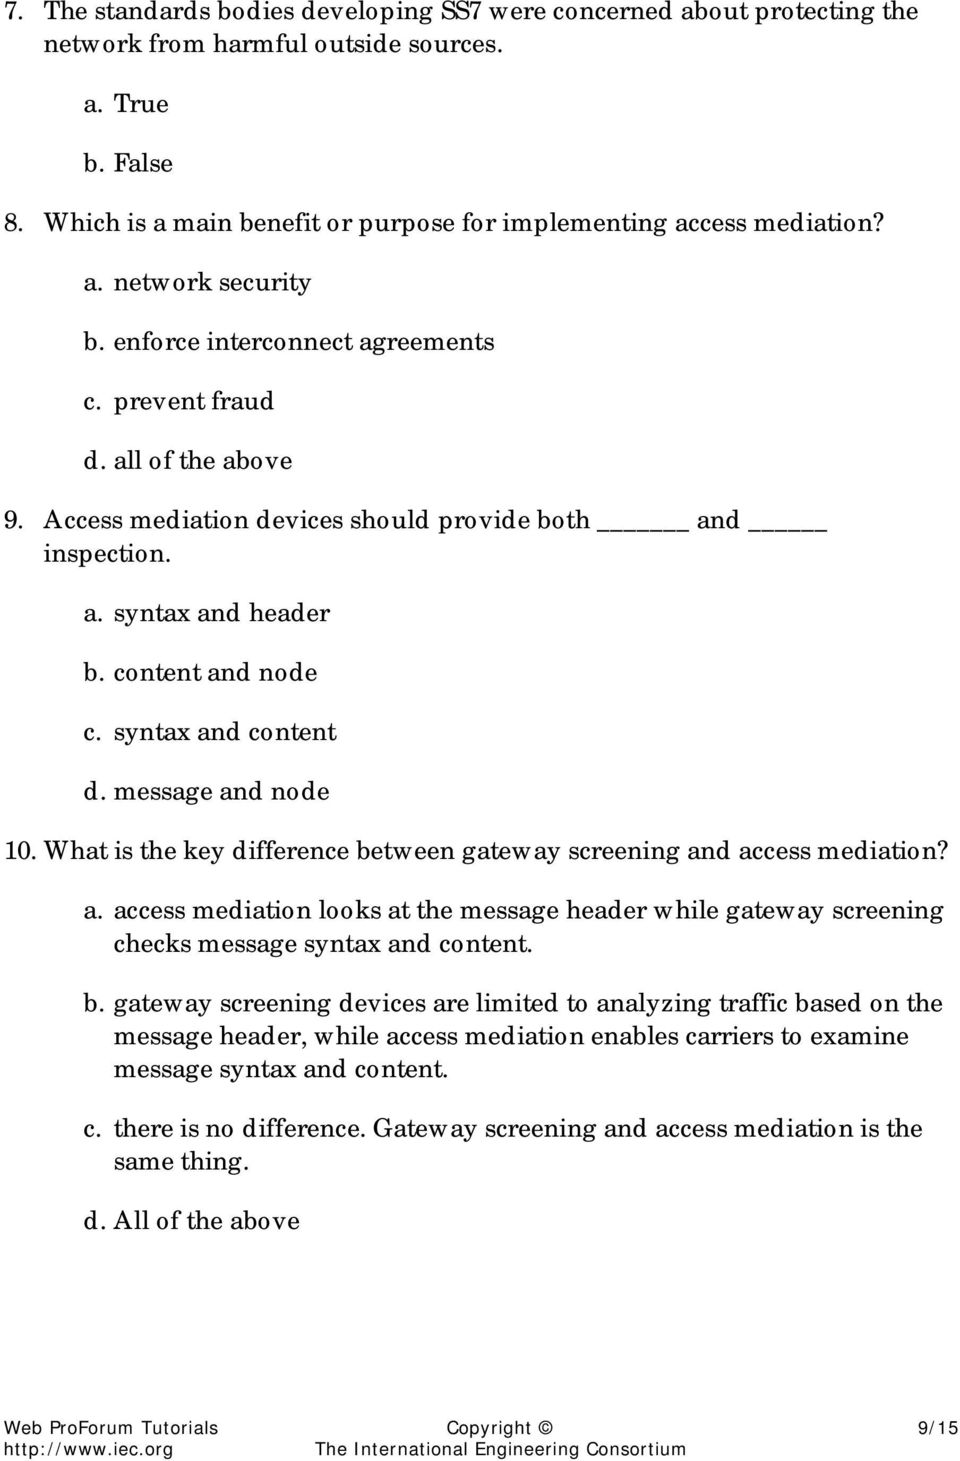 message and node 10. What is the key difference between gateway screening and access mediation? a. access mediation looks at the message header while gateway screening checks message syntax and content.